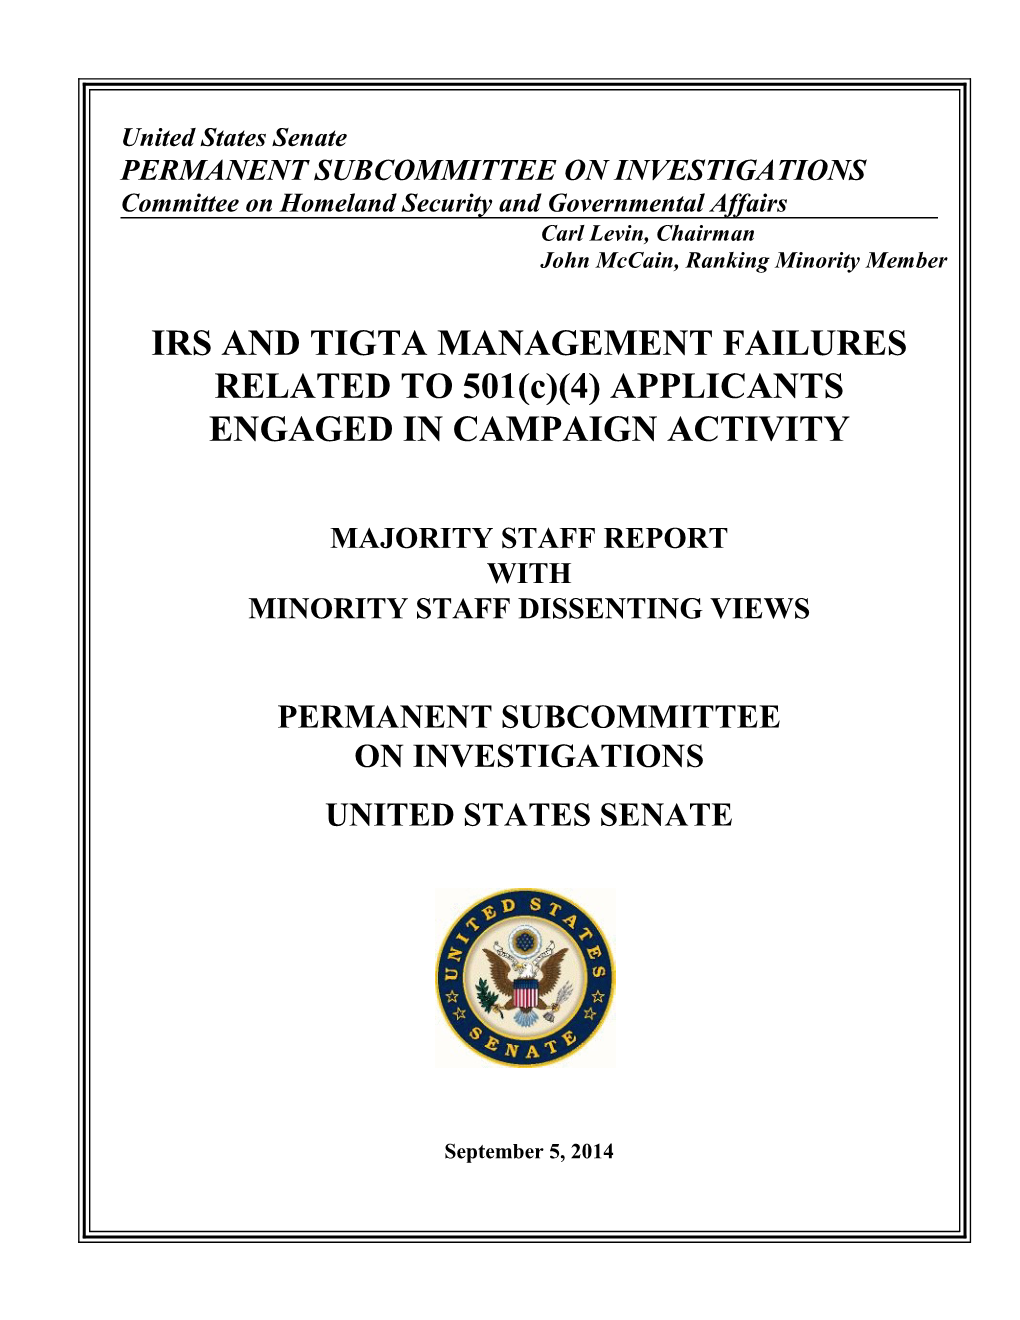 IRS and TIGTA MANAGEMENT FAILURES RELATED to 501(C)(4) APPLICANTS ENGAGED in CAMPAIGN ACTIVITY